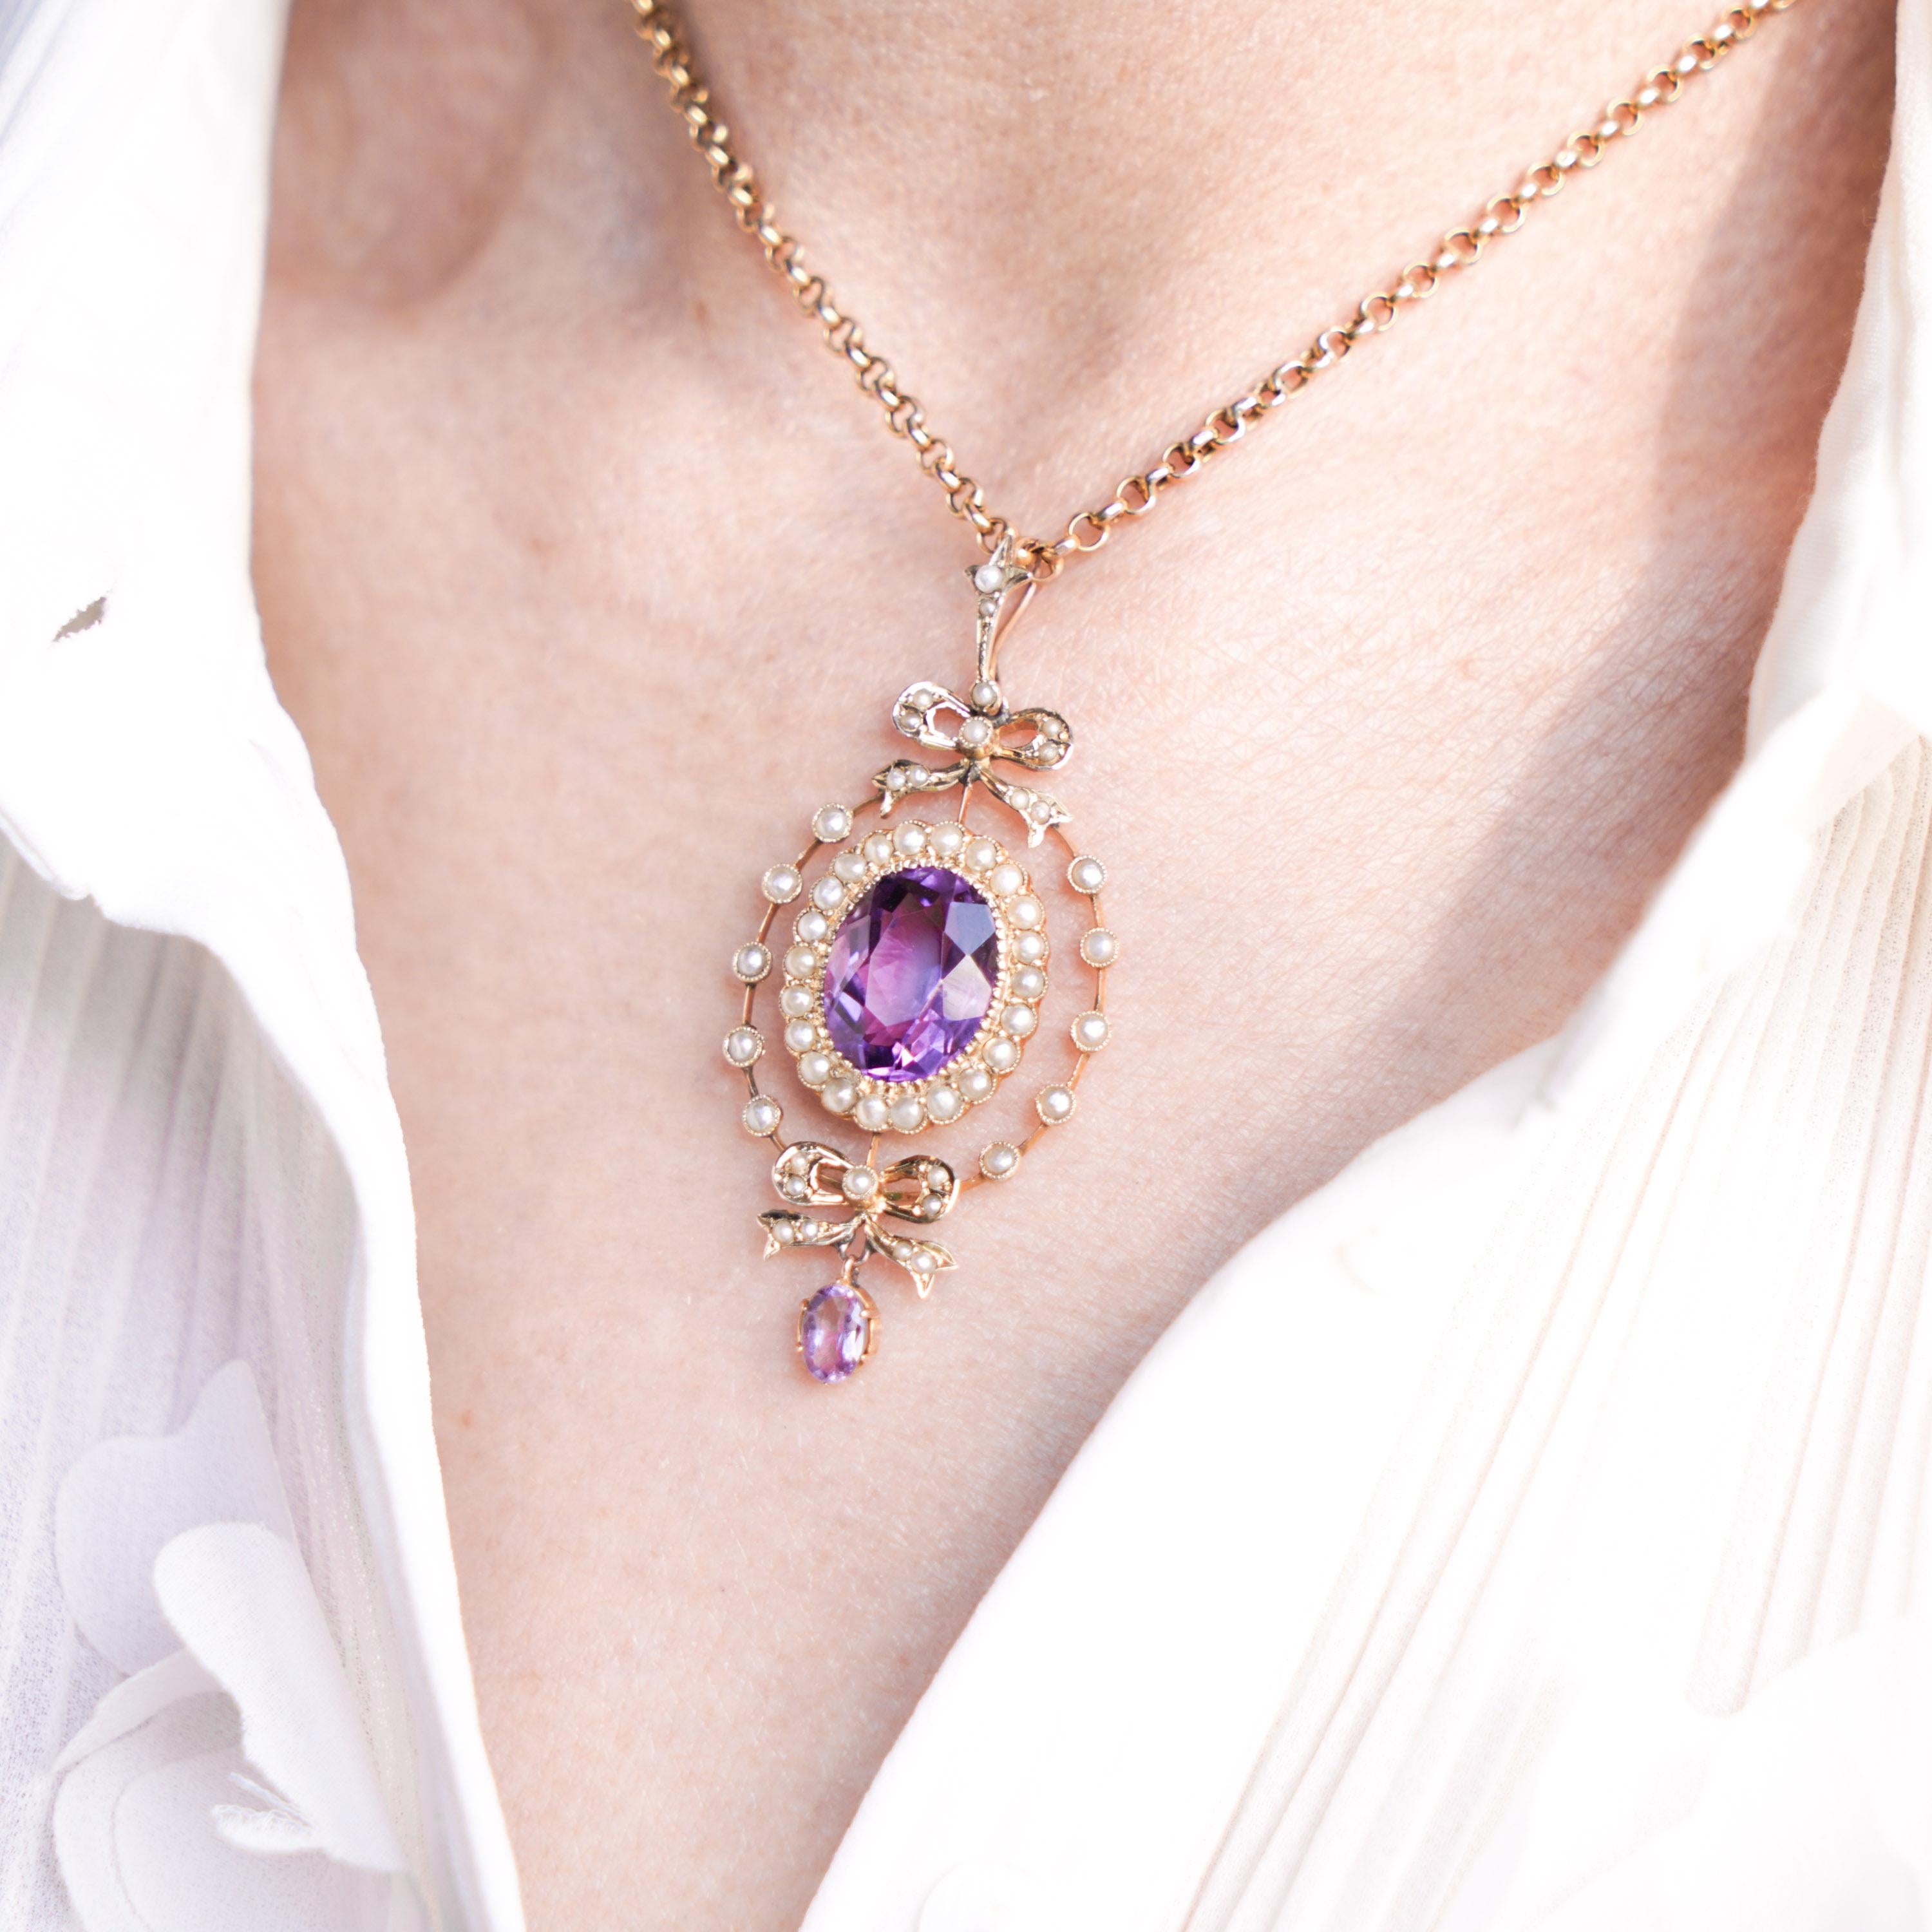 We are delighted to offer this fabulous antique amethyst & seed pearl necklace made in the Edwardian period c.1890.

(Please note, this listing is for the pendant only and does not include the antique belcher chain. We will, however, include a